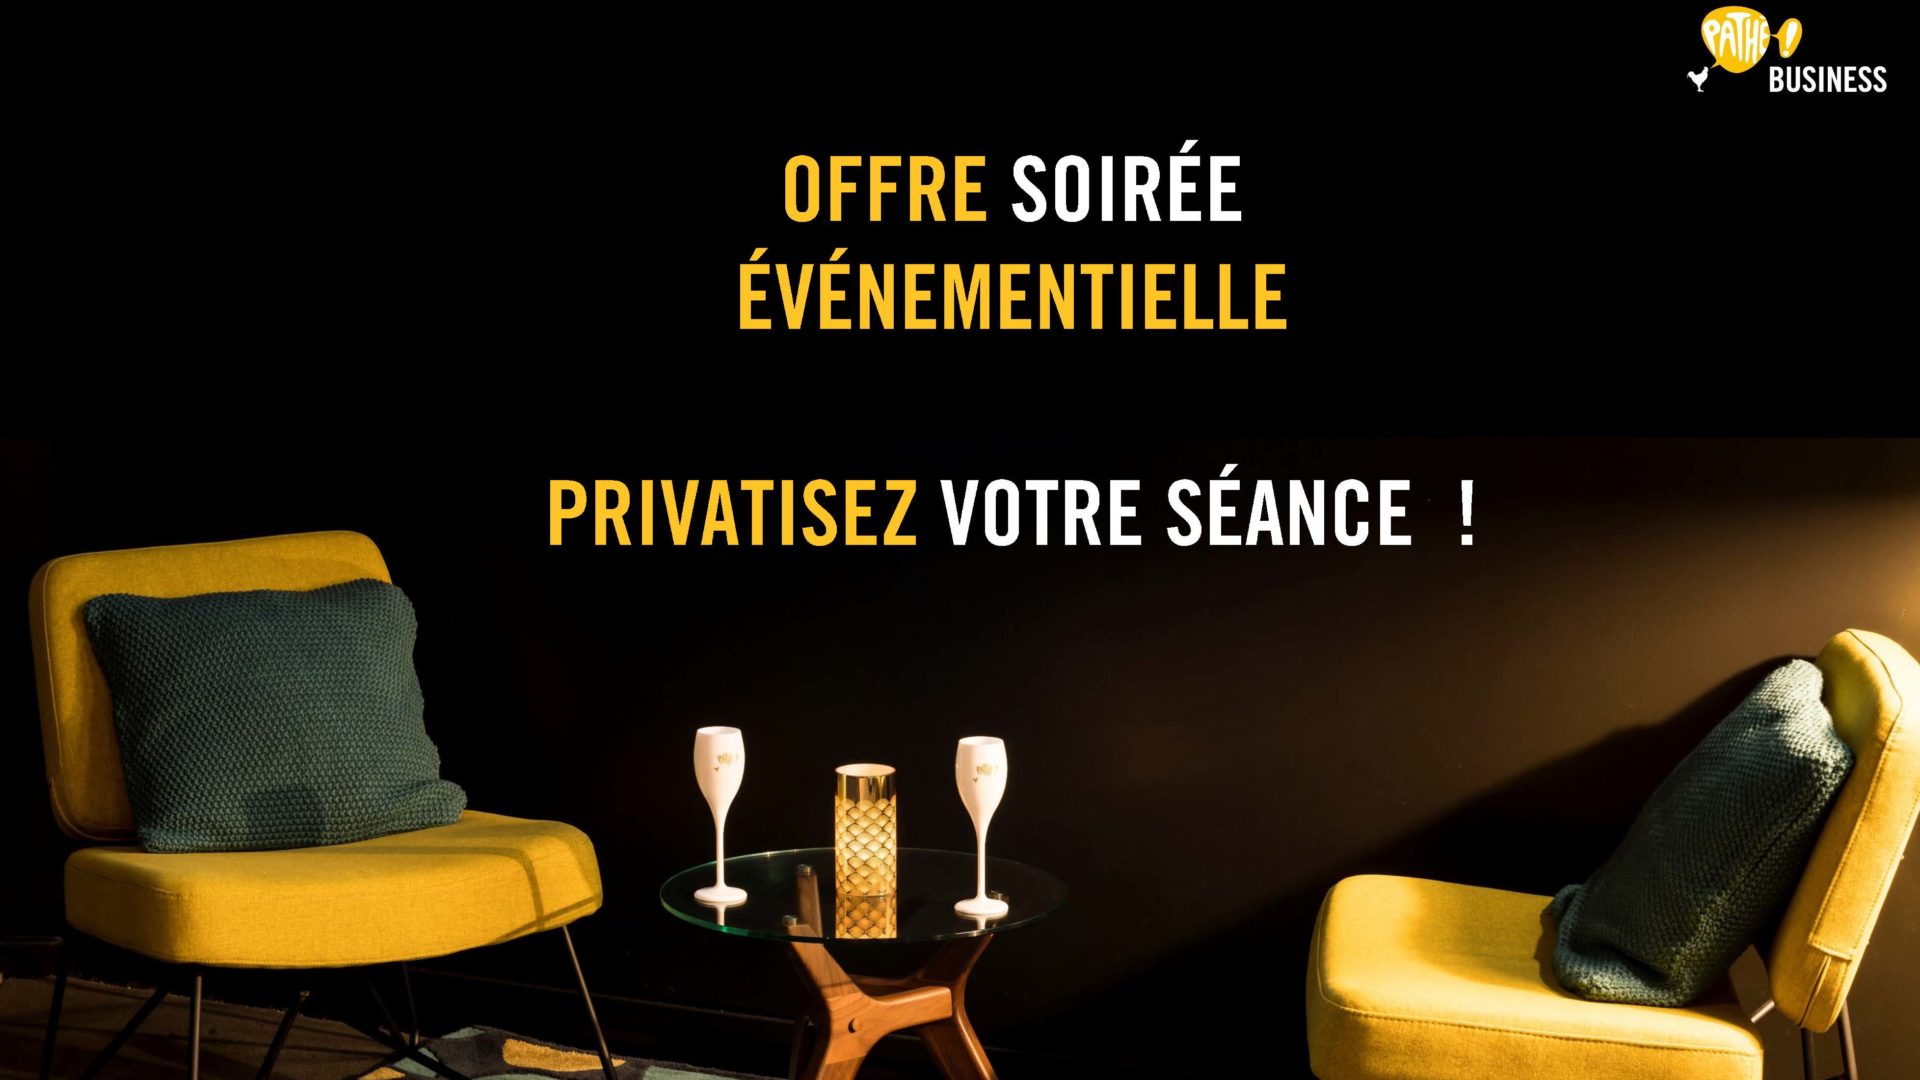 OFFRE SOIREE Page